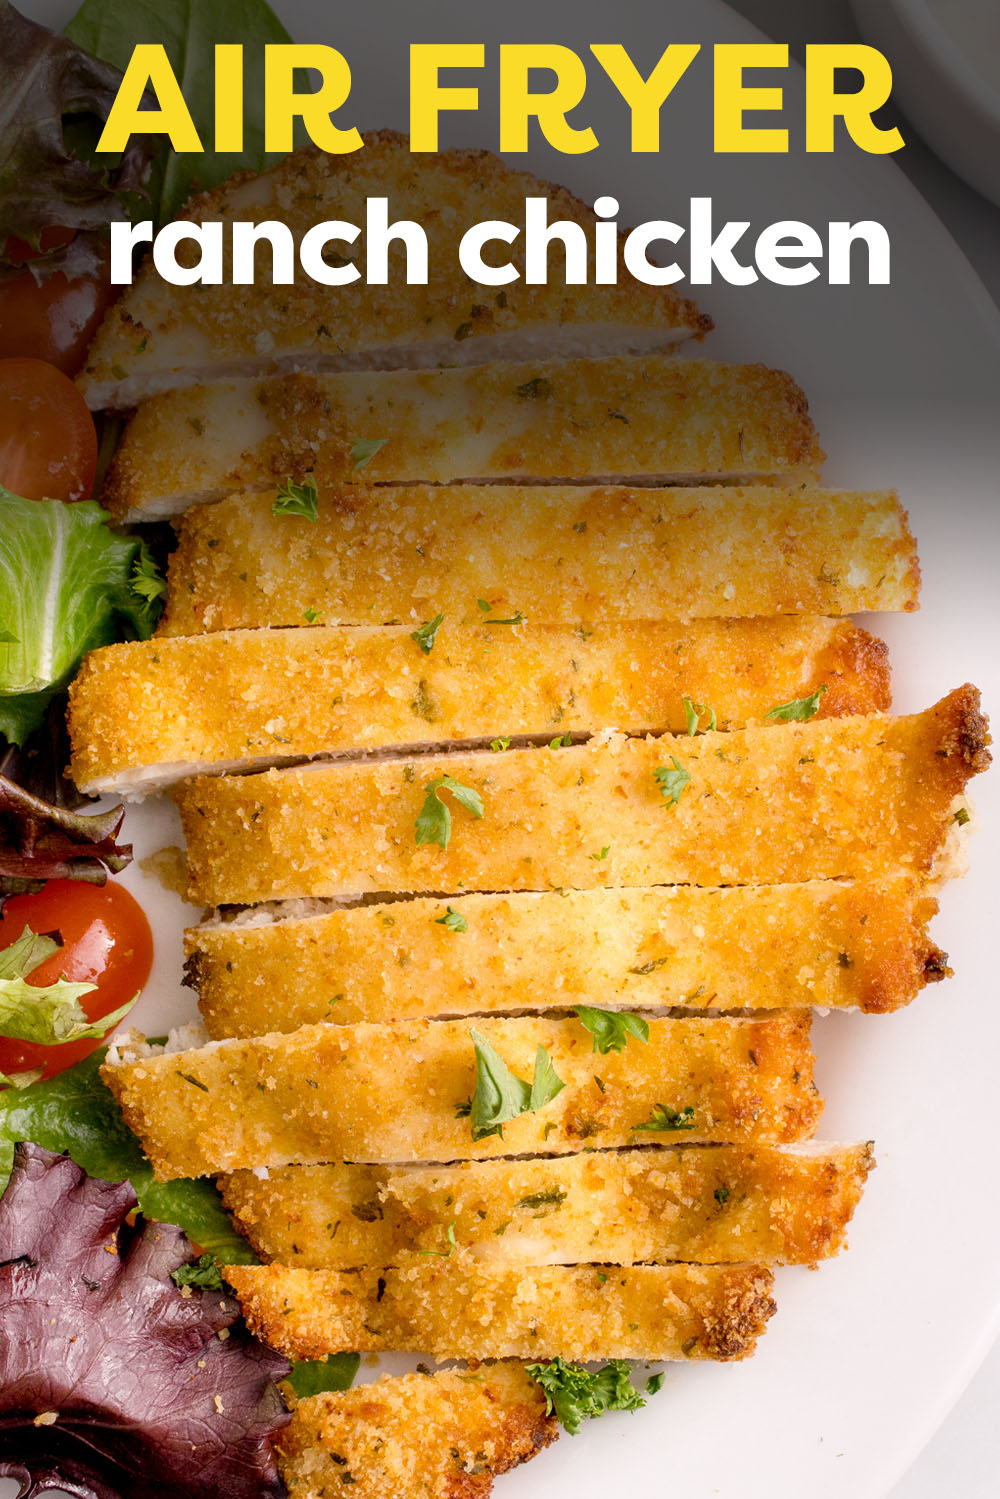 Our Air Fryer Ranch Chicken is a quick & easy crispy breaded chicken recipe made with breadcrumbs and ranch seasoning! It's ready in just 30 minutes and perfect for weeknight dinners!